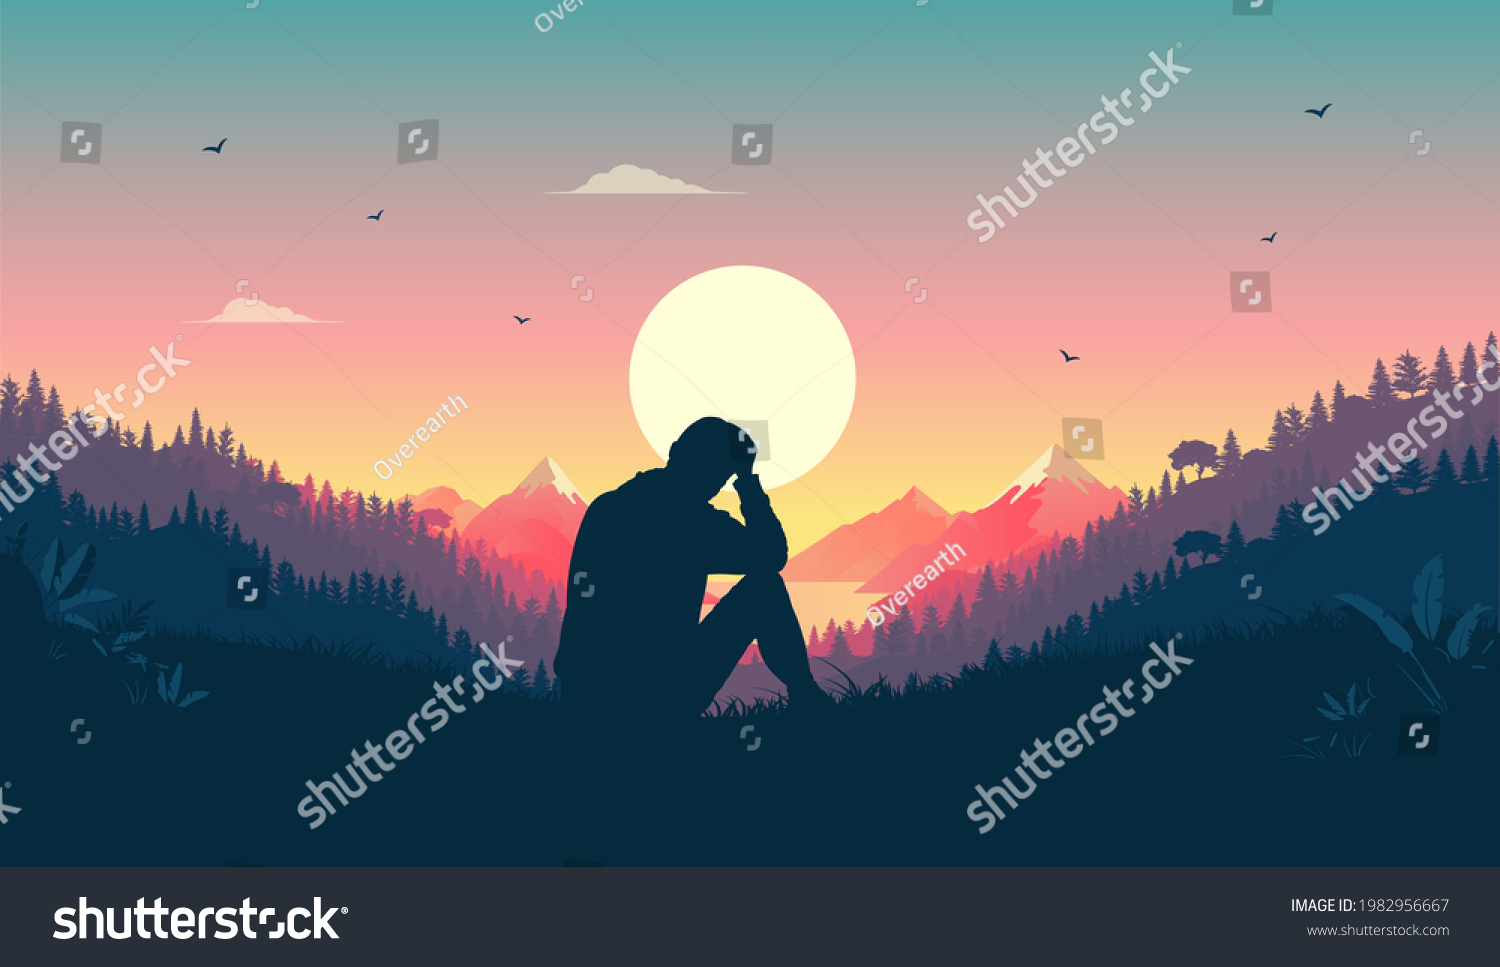 Melancholy man sitting in landscape thinking and contemplating. Beautiful warm nature and sunset in sky. Melancholic feeling concept. Vector illustration. #1982956667